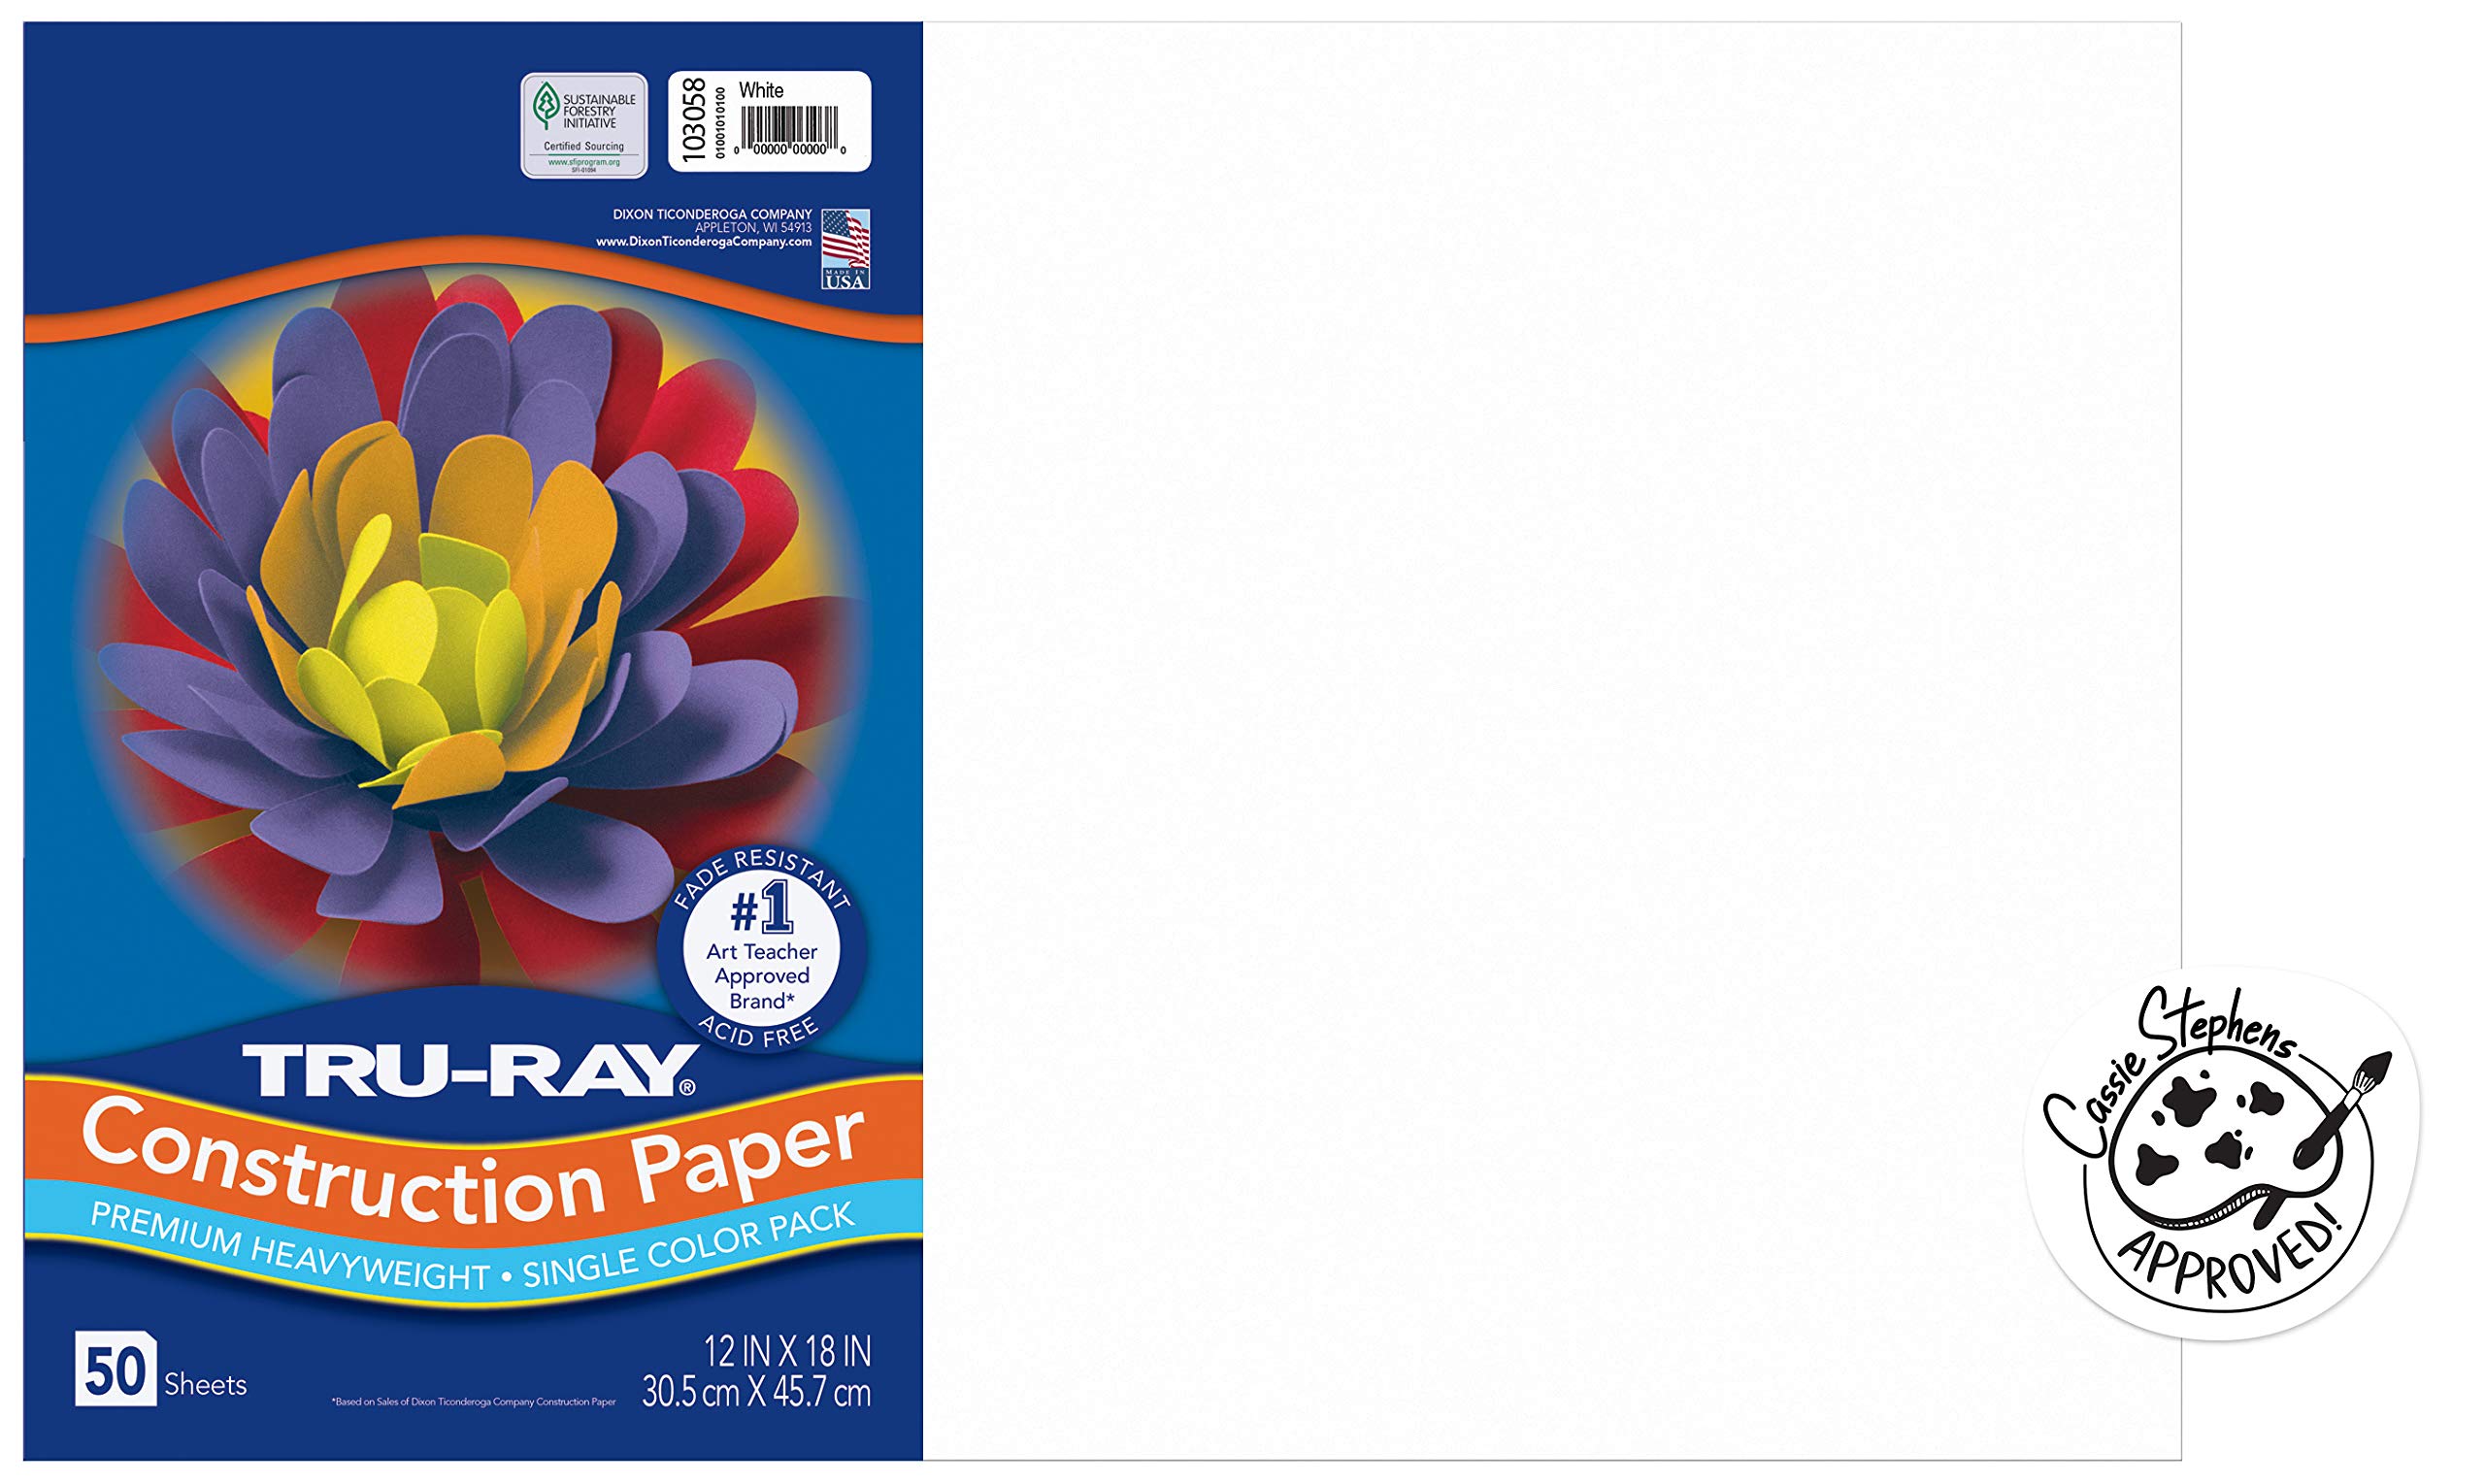 Construction Paper Smart-Stack - Tru-Ray